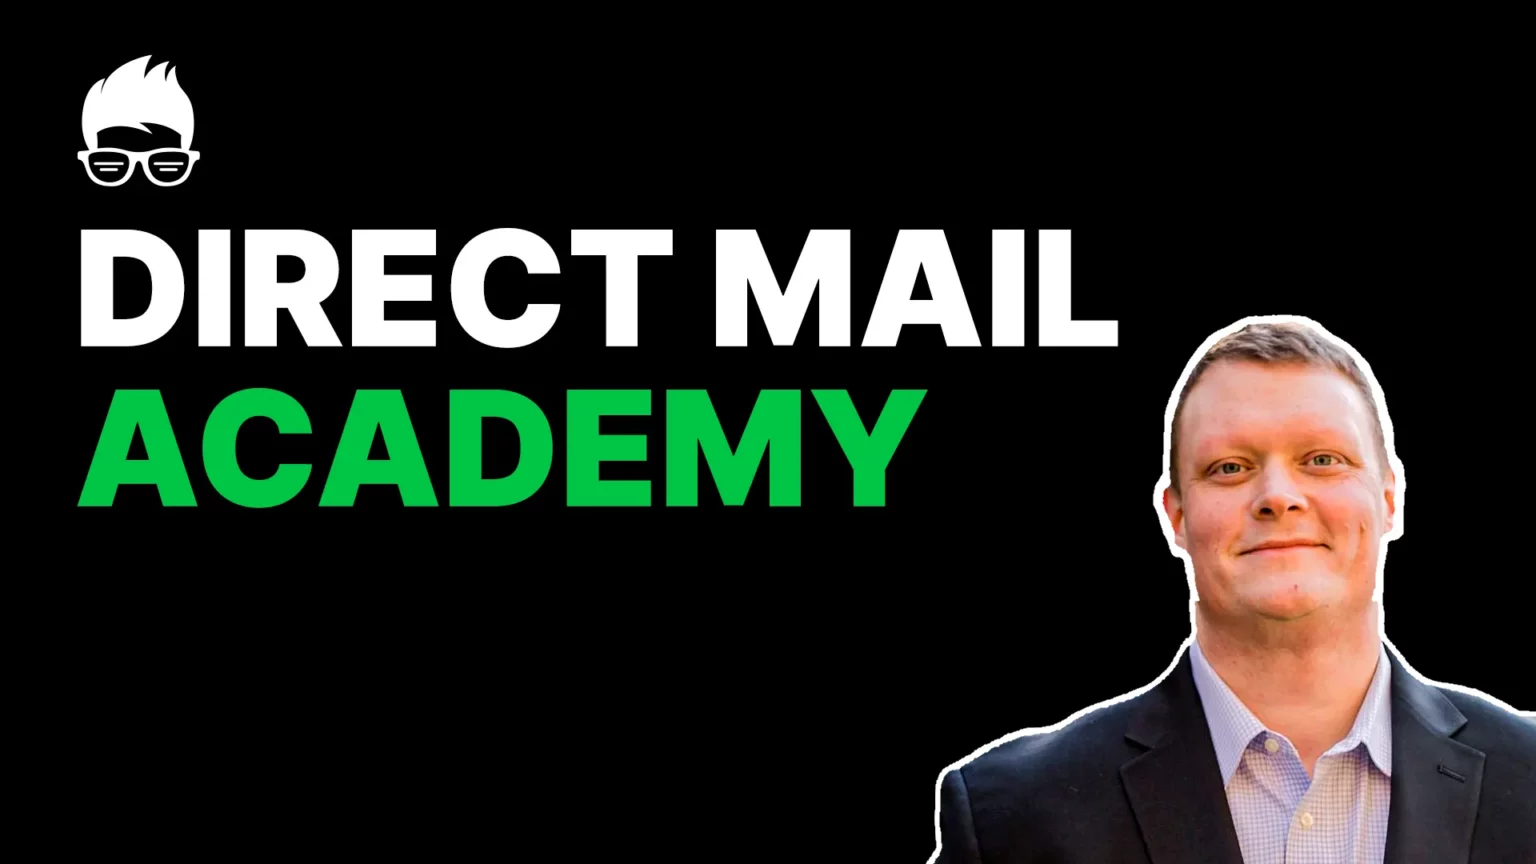 Direct Mail Academy Video Intro